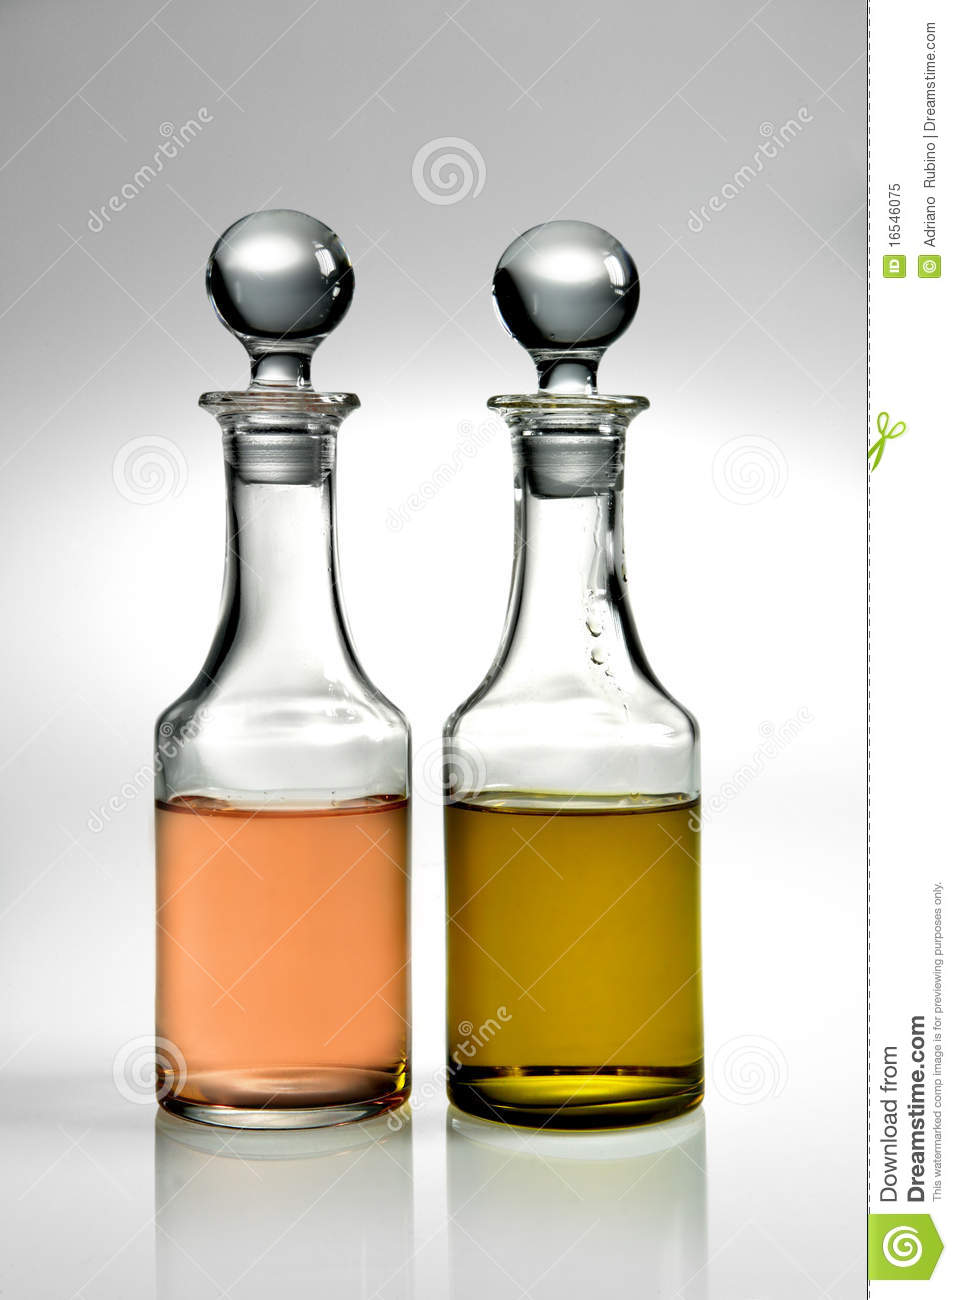 Oil And Vinegar Royalty Free Stock Photo   Image  16546075